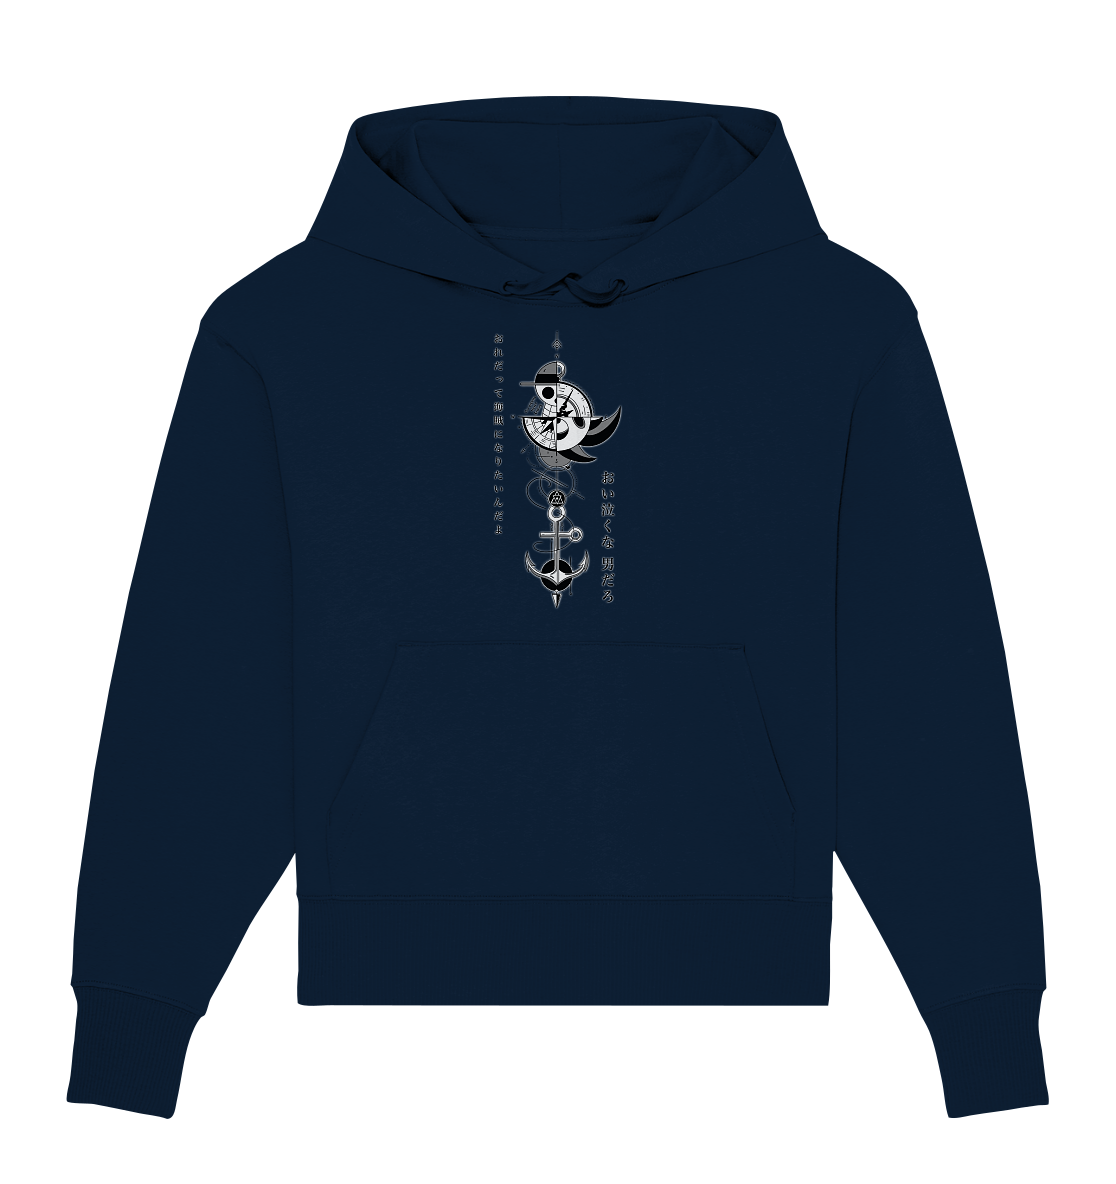 One Piece Our Dreams - Oversize Hoodie SALE